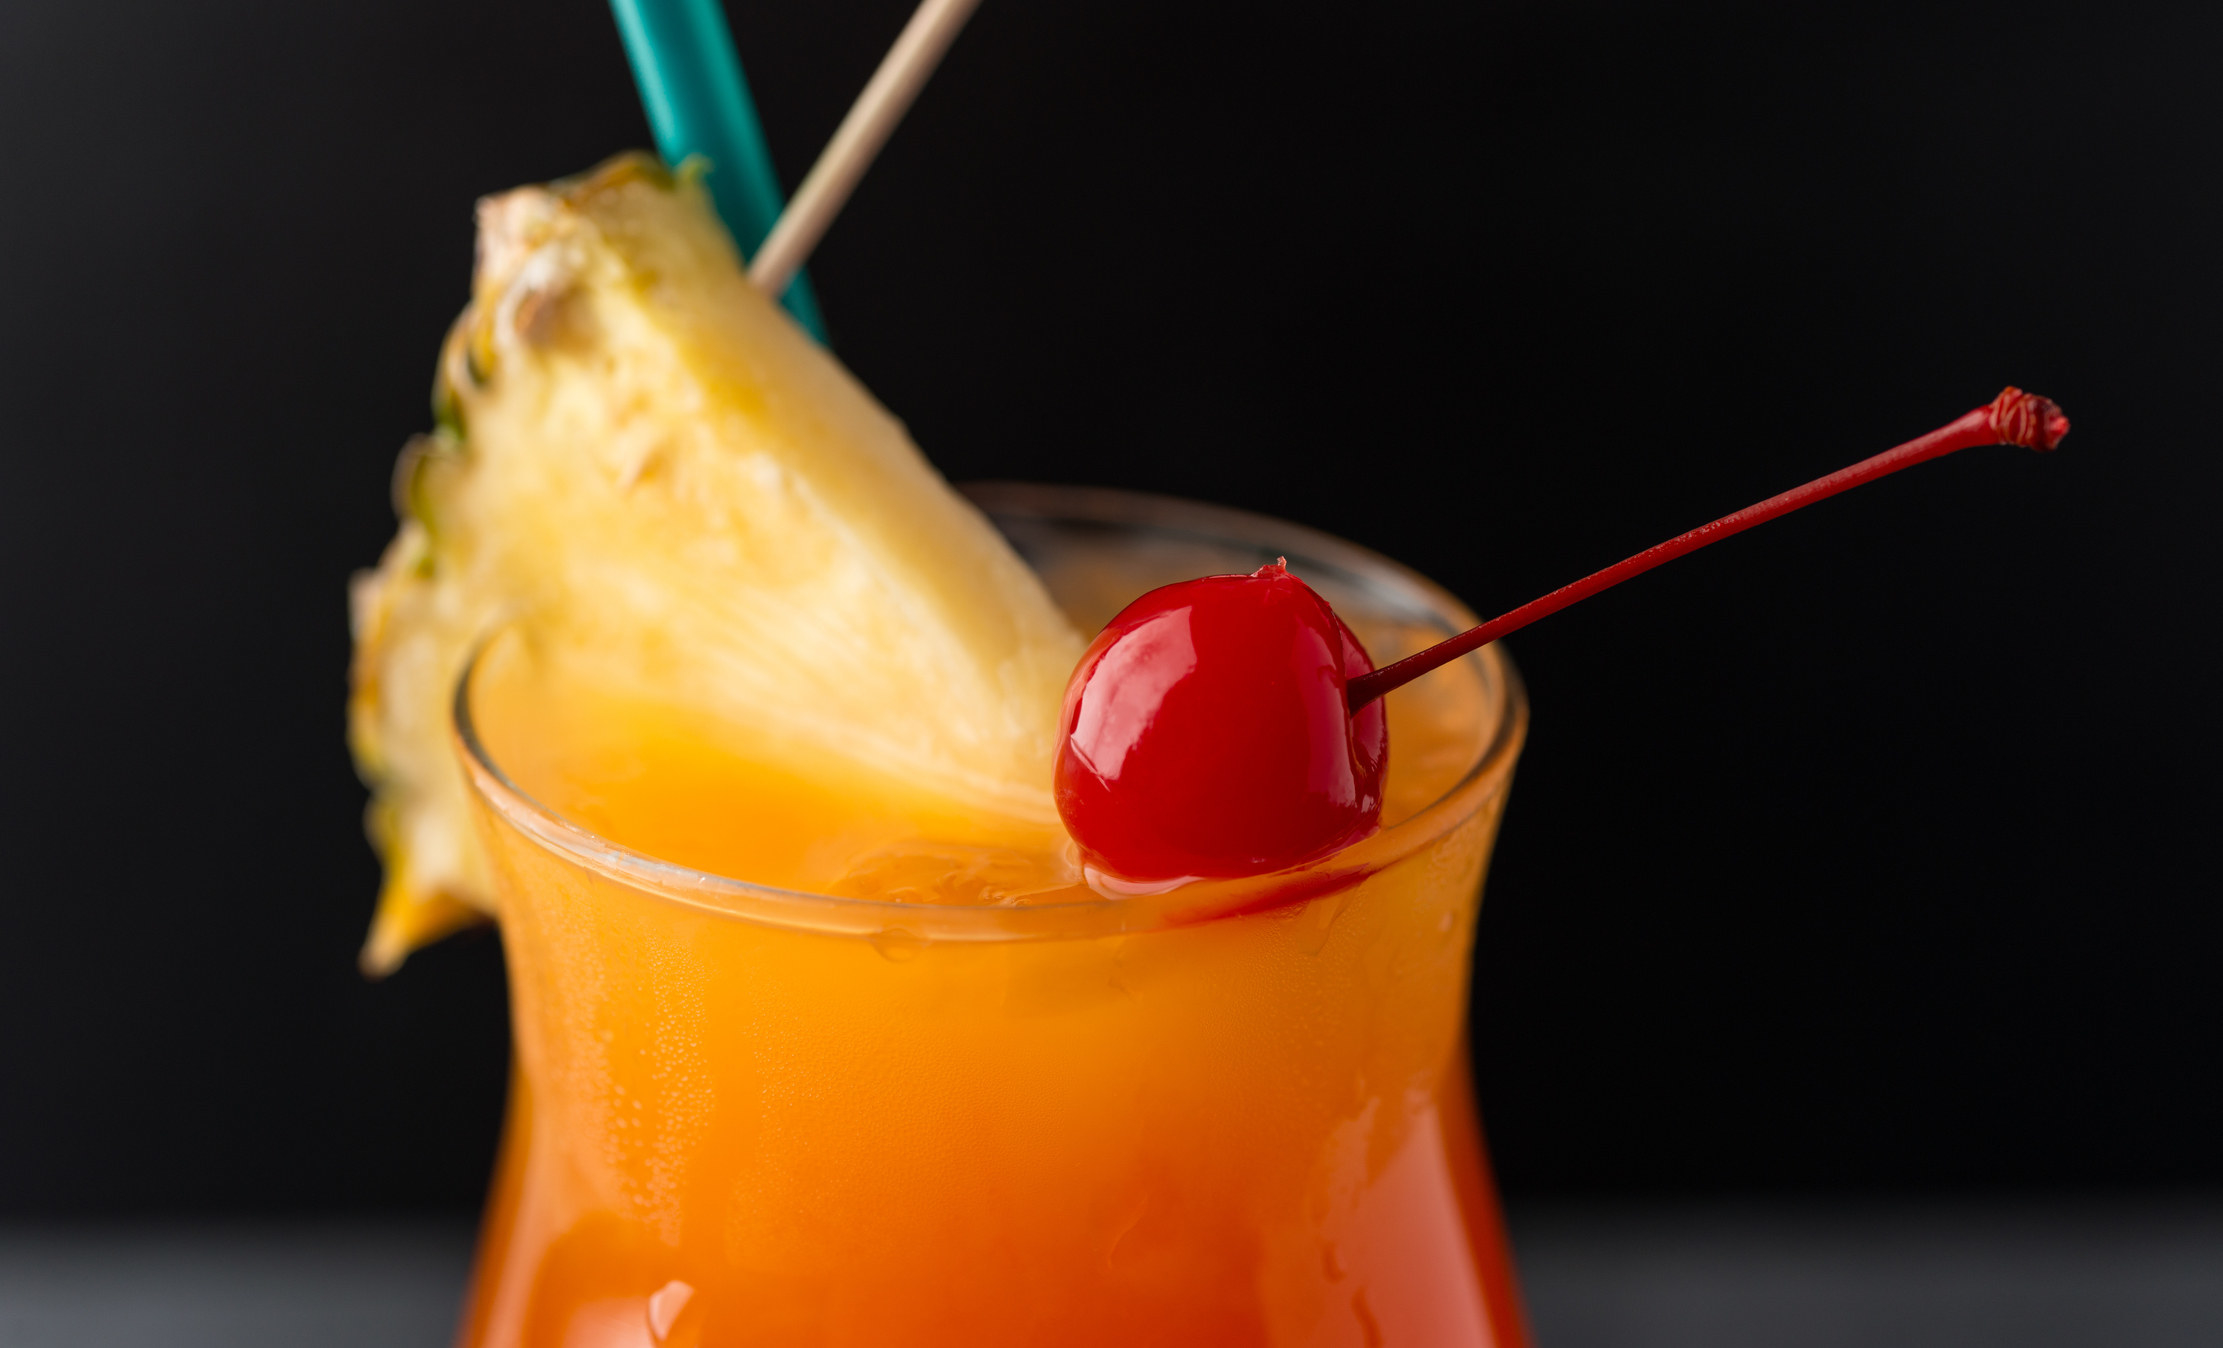 A colorful drink with a pineapple and a cherry on top